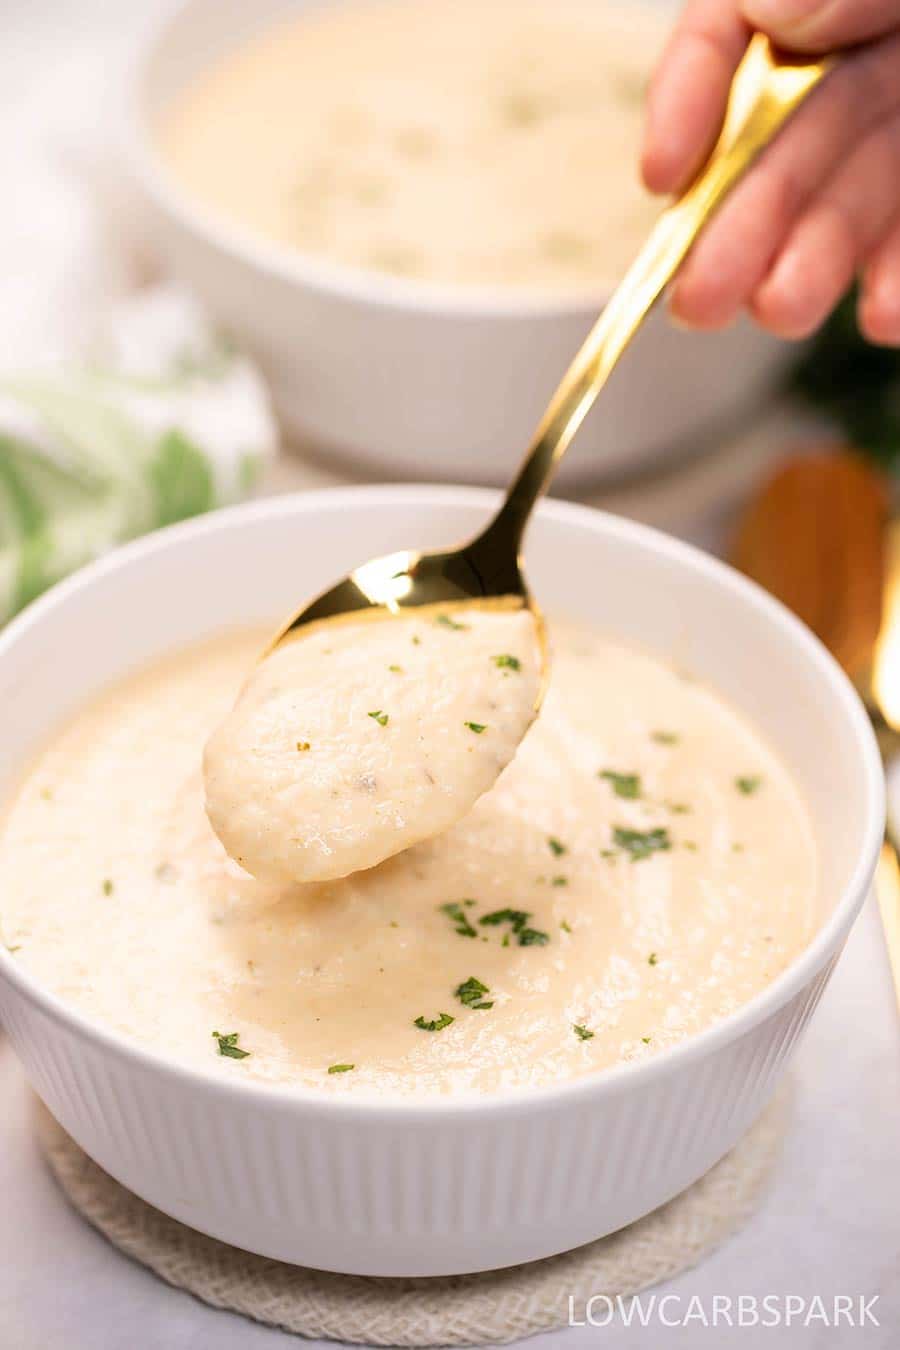 Keto Cauliflower Soup in a bowl with a spoon